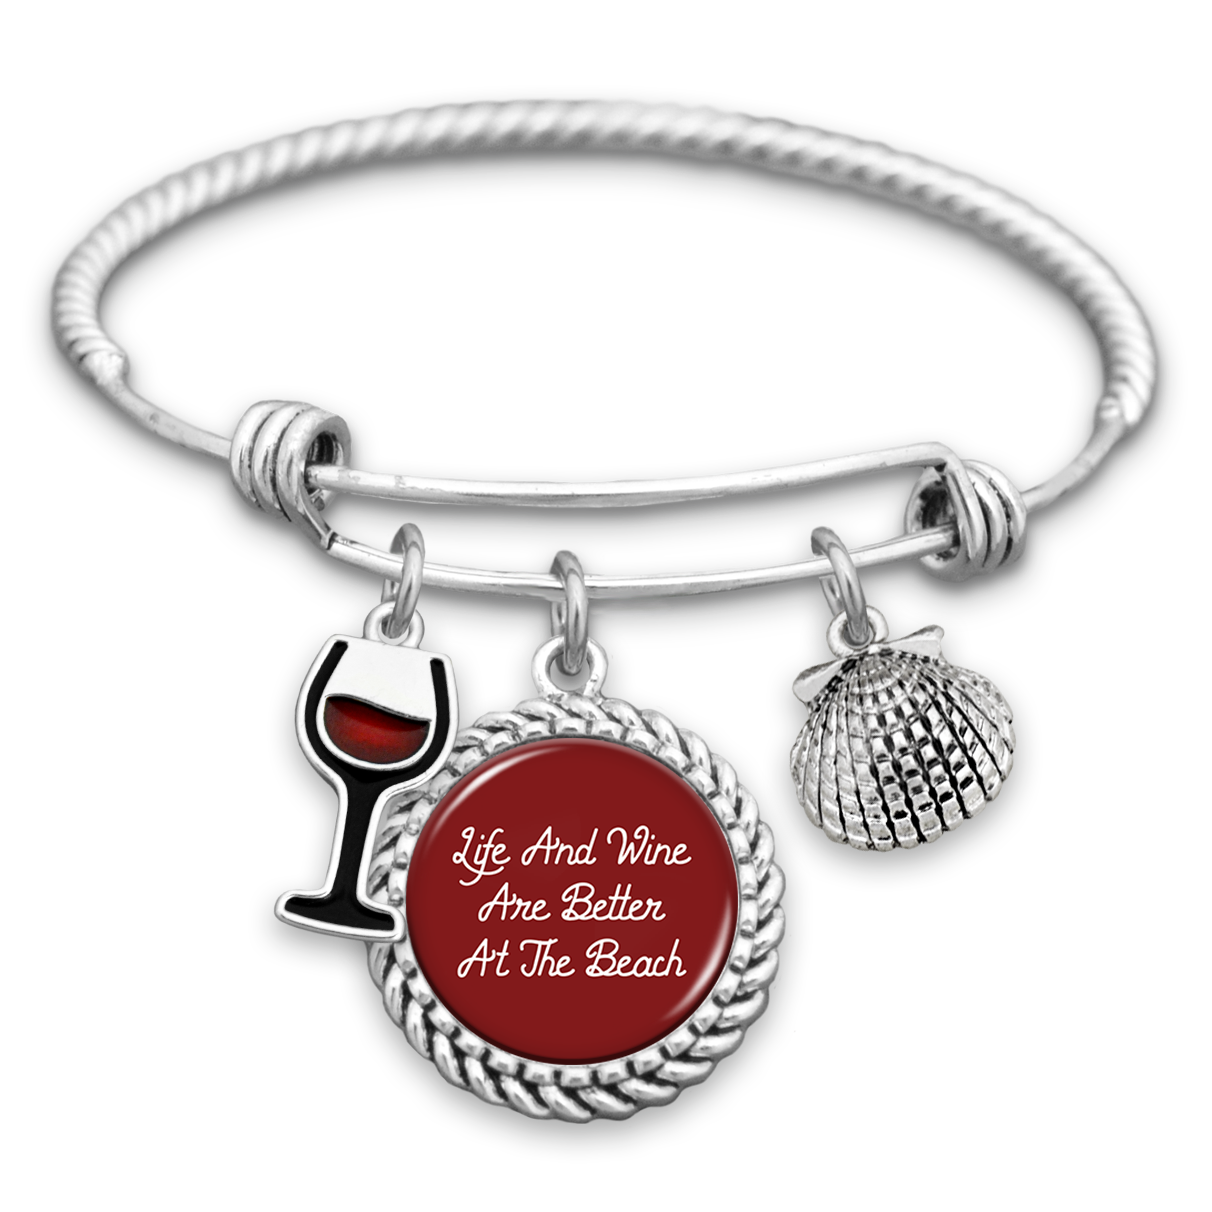 Life And Wine Are Better At The Beach Charm Bracelet